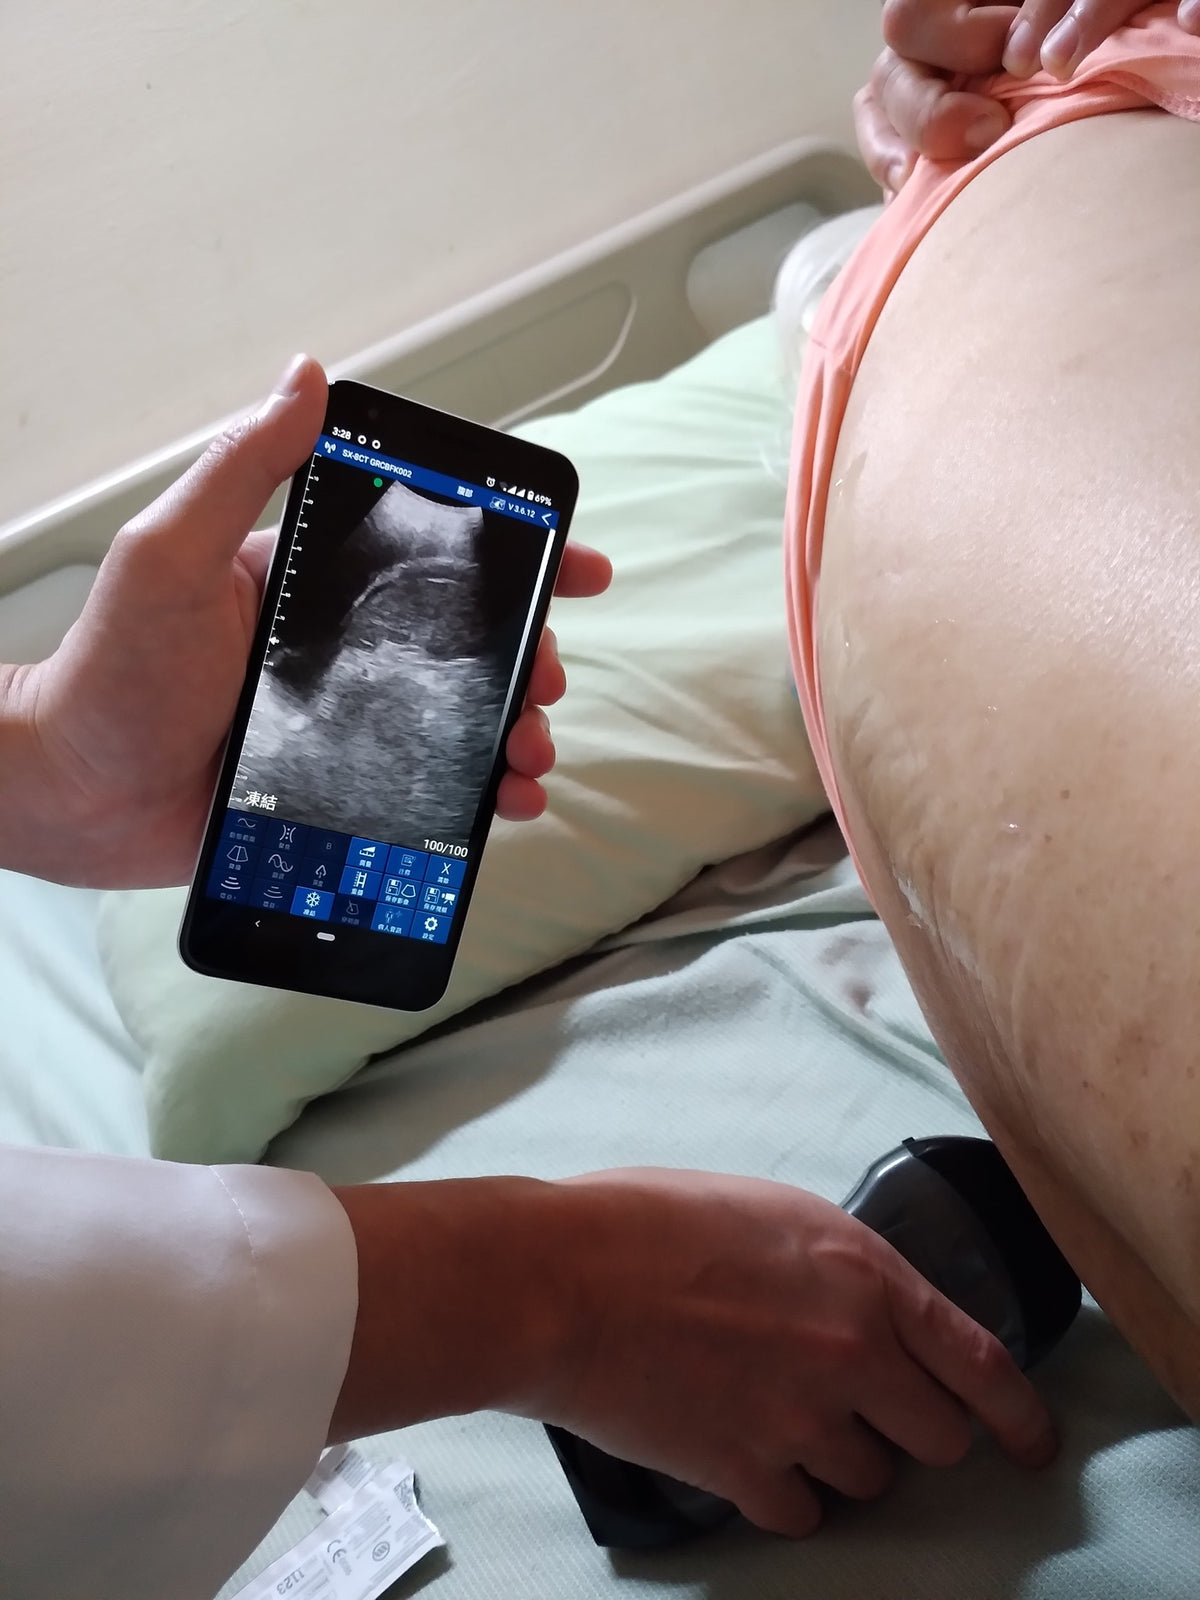 EagleView ultrasound is ultilized in many global medical practices.